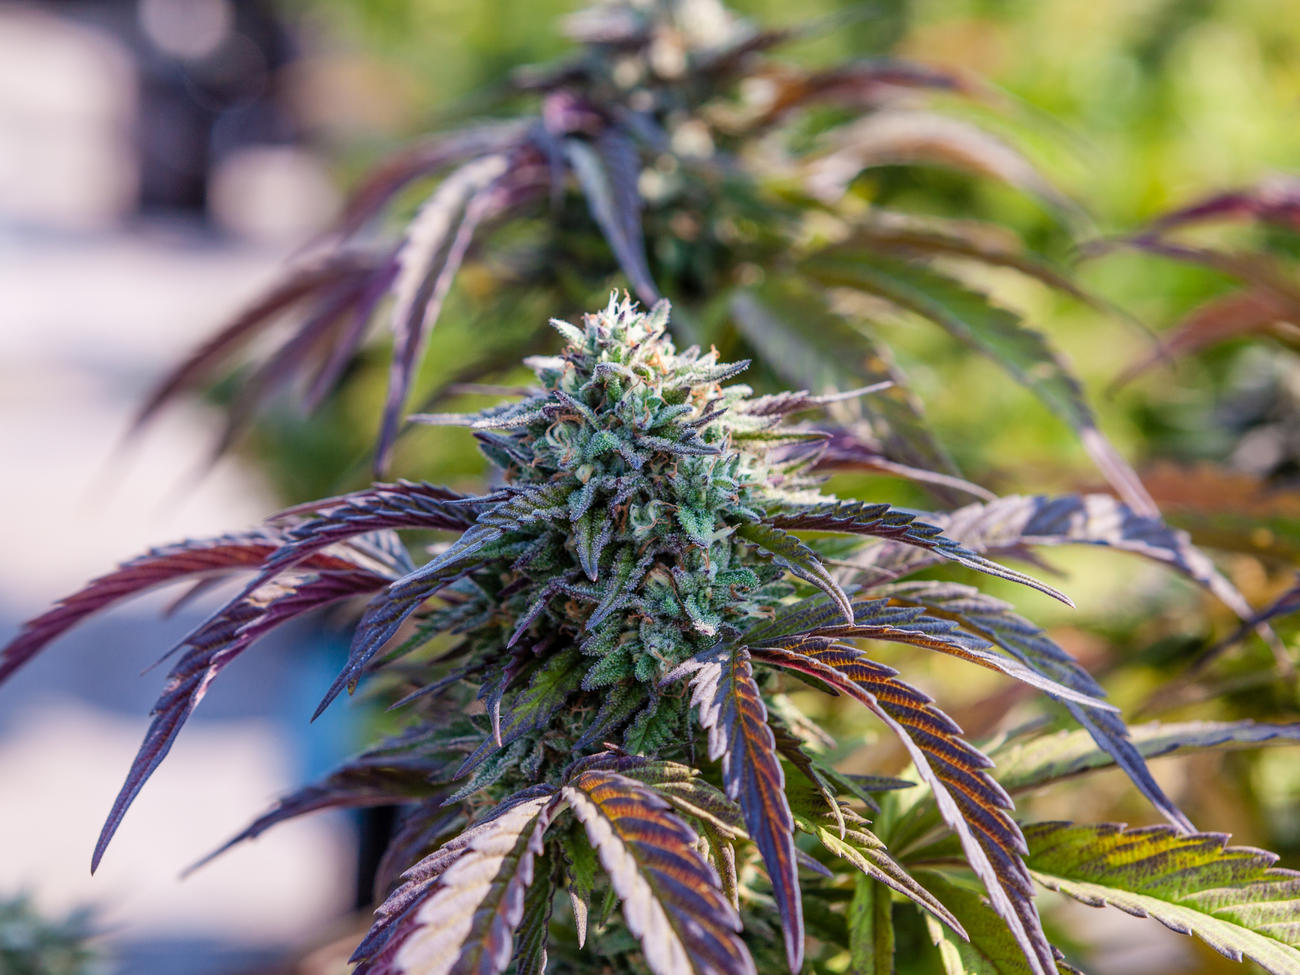 Our Guide to Landscaping with Cannabis